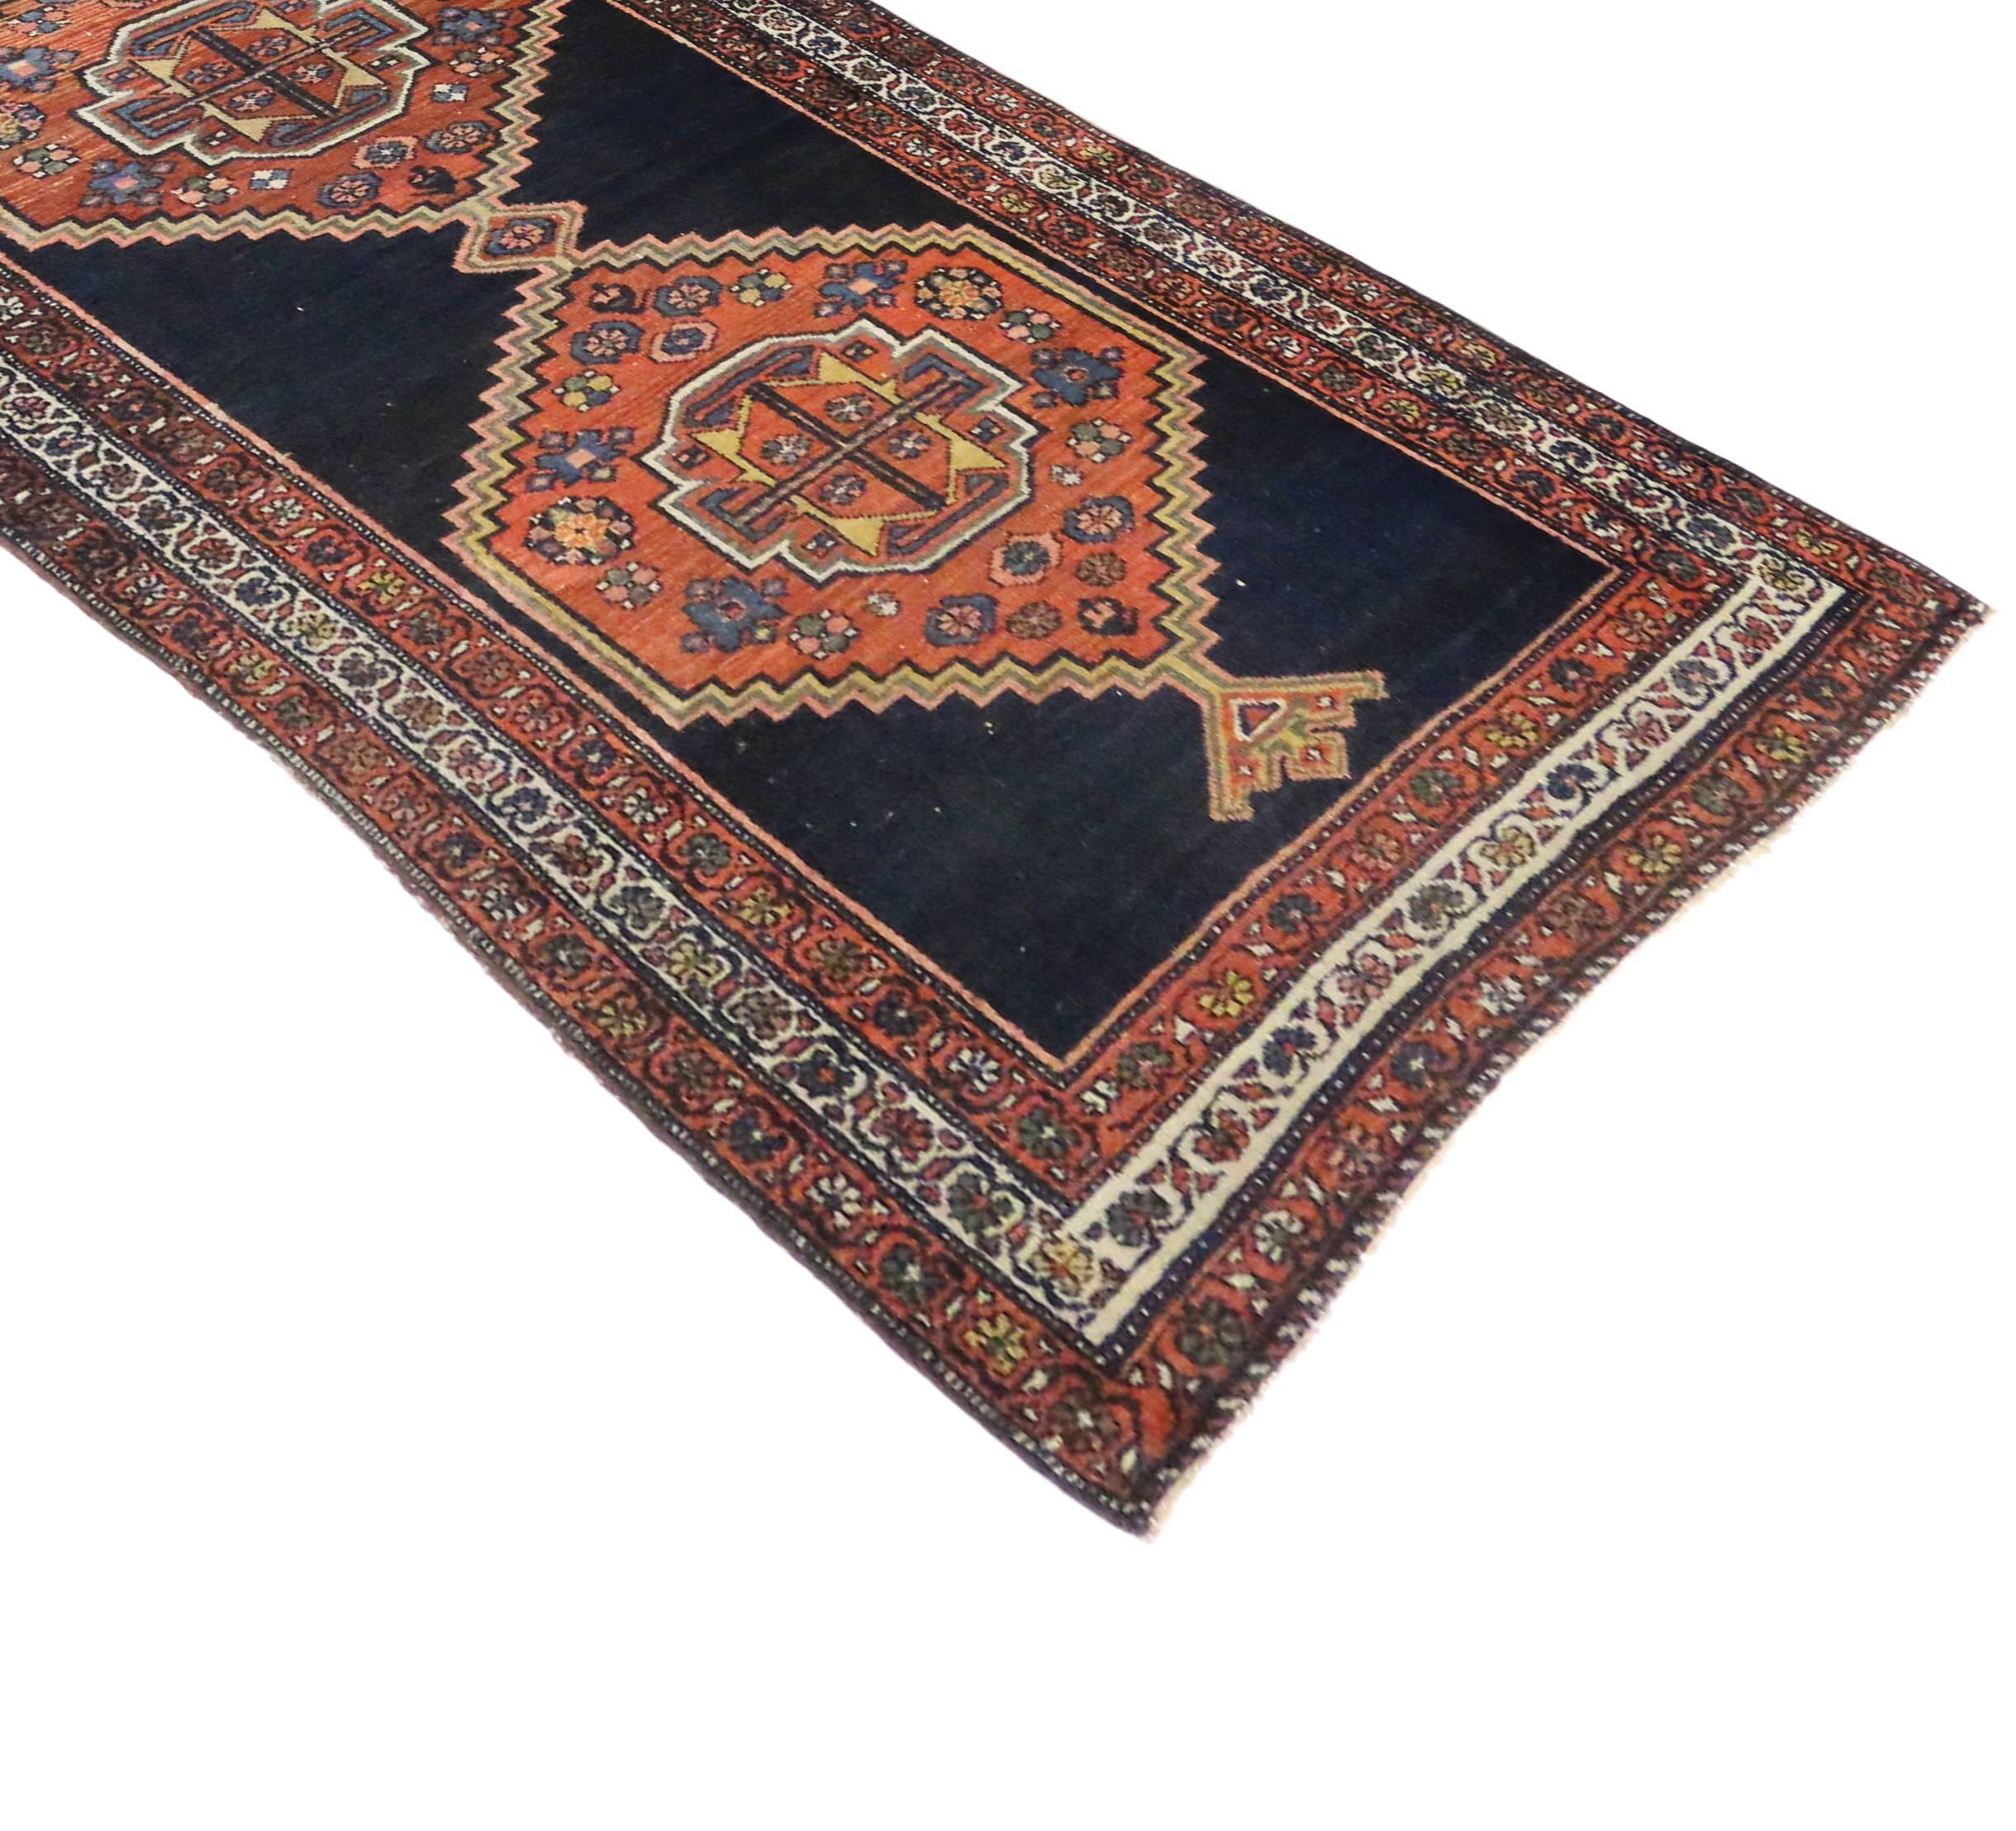 Full of character and stately presence, this antique Persian Hamadan runner with modern tribal style showcases an extravagant geometric design rendered in navy, black, orange, rust, blue, pink, brown, tan and ivory-beige. Highlighting an intrinsic